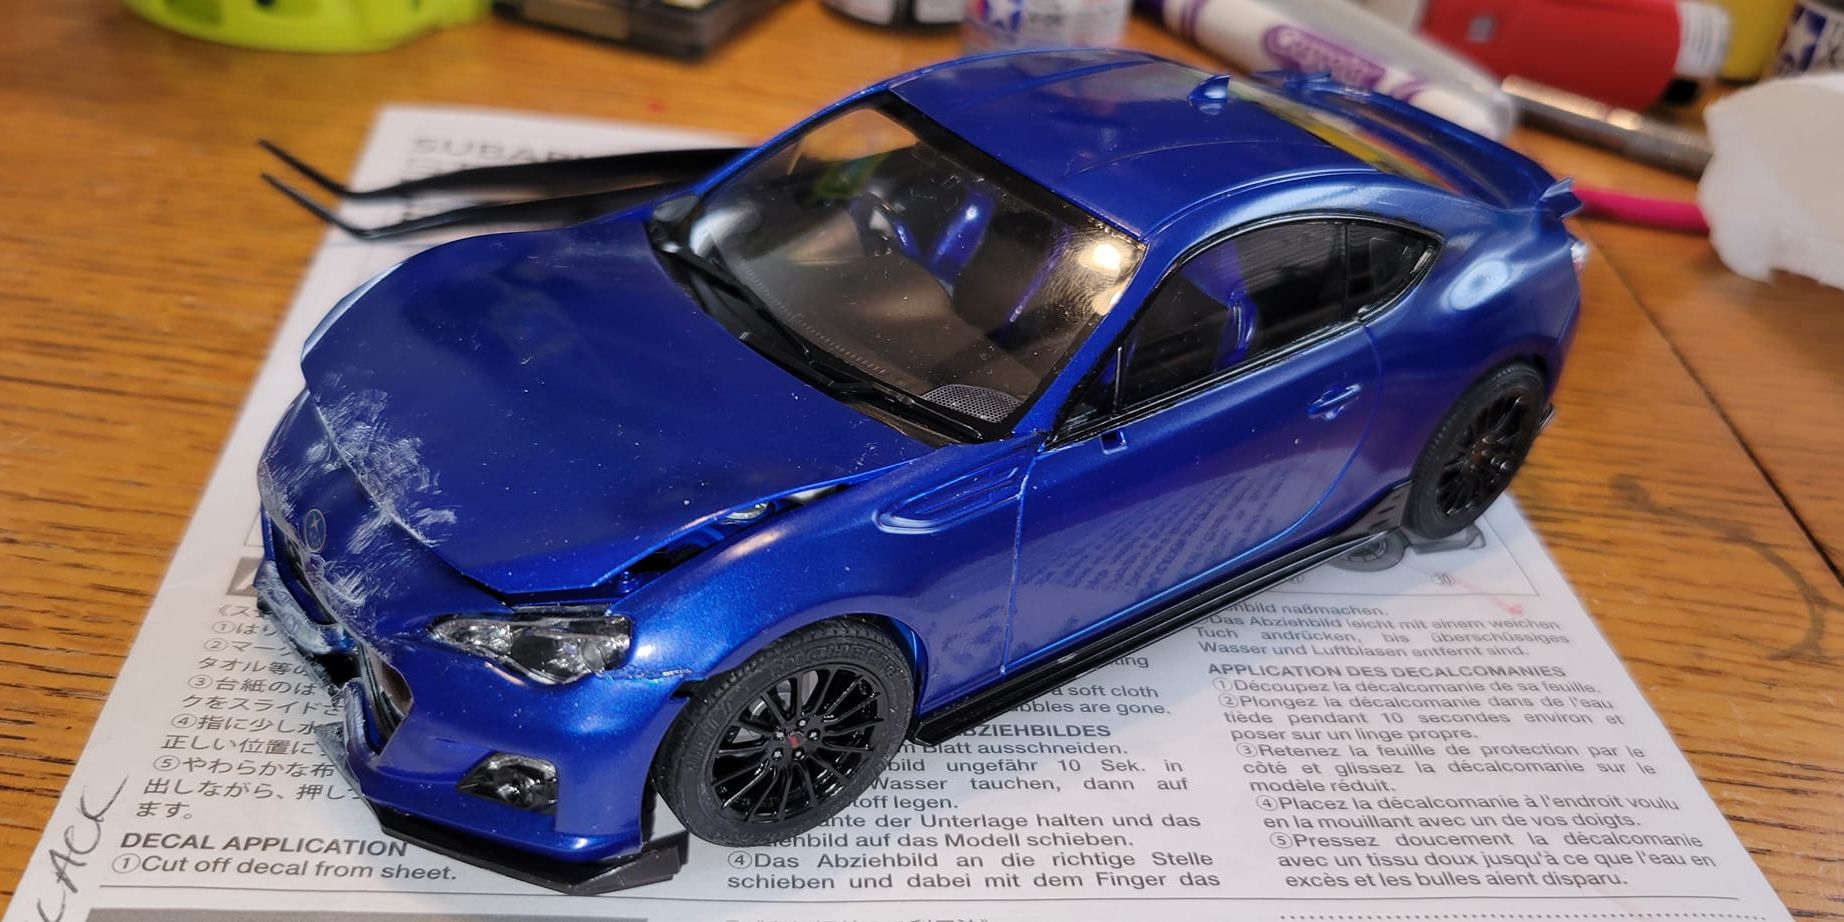 Someone Gifted Their Friend a Model of Their Wrecked Subaru BRZ for Christmas